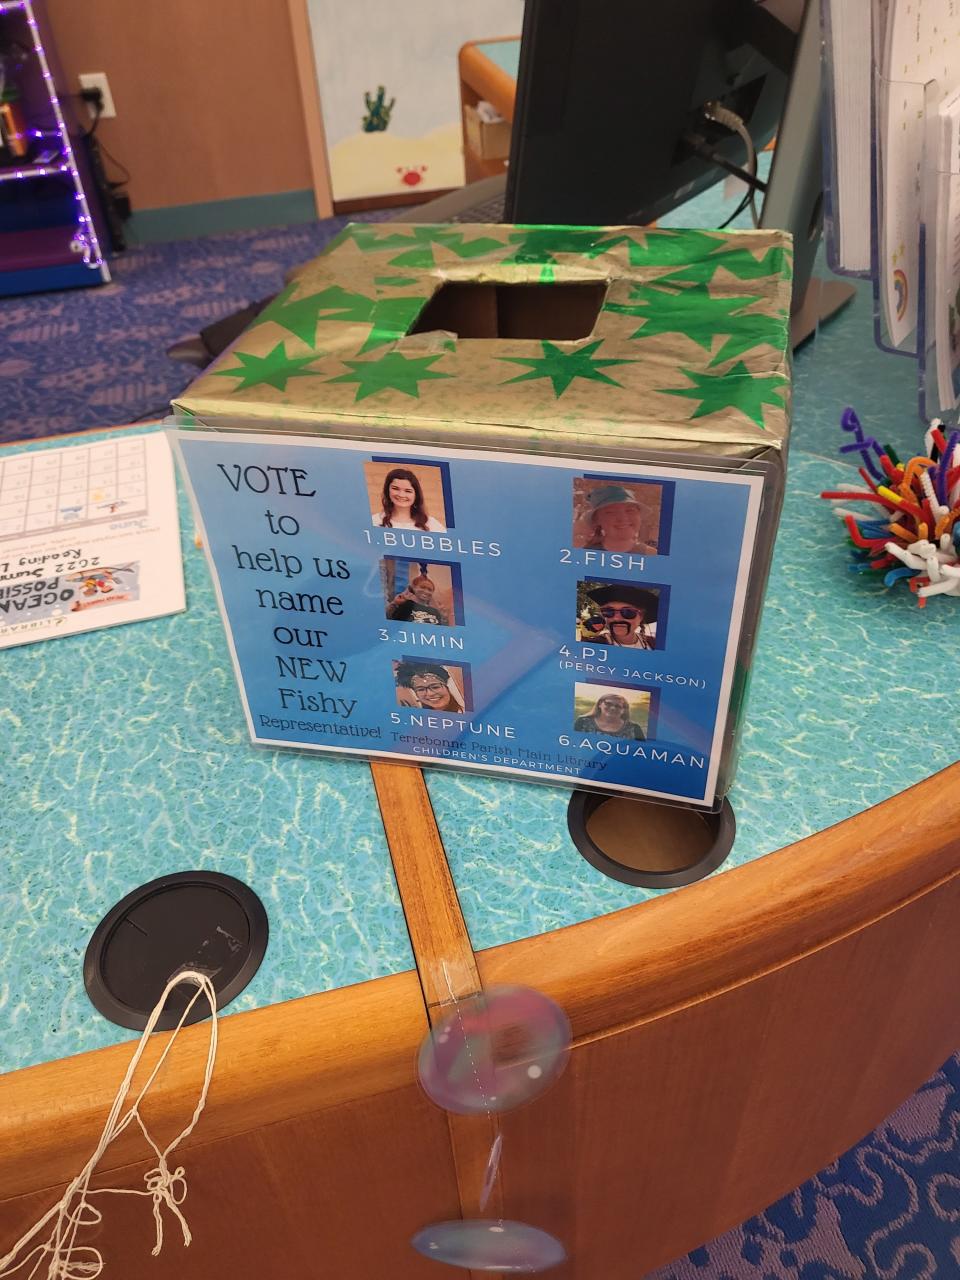 A ballot box displays photos of the librarians who suggested each possible name for the beta fish. Library visitors cast the most votes for Bubbles.